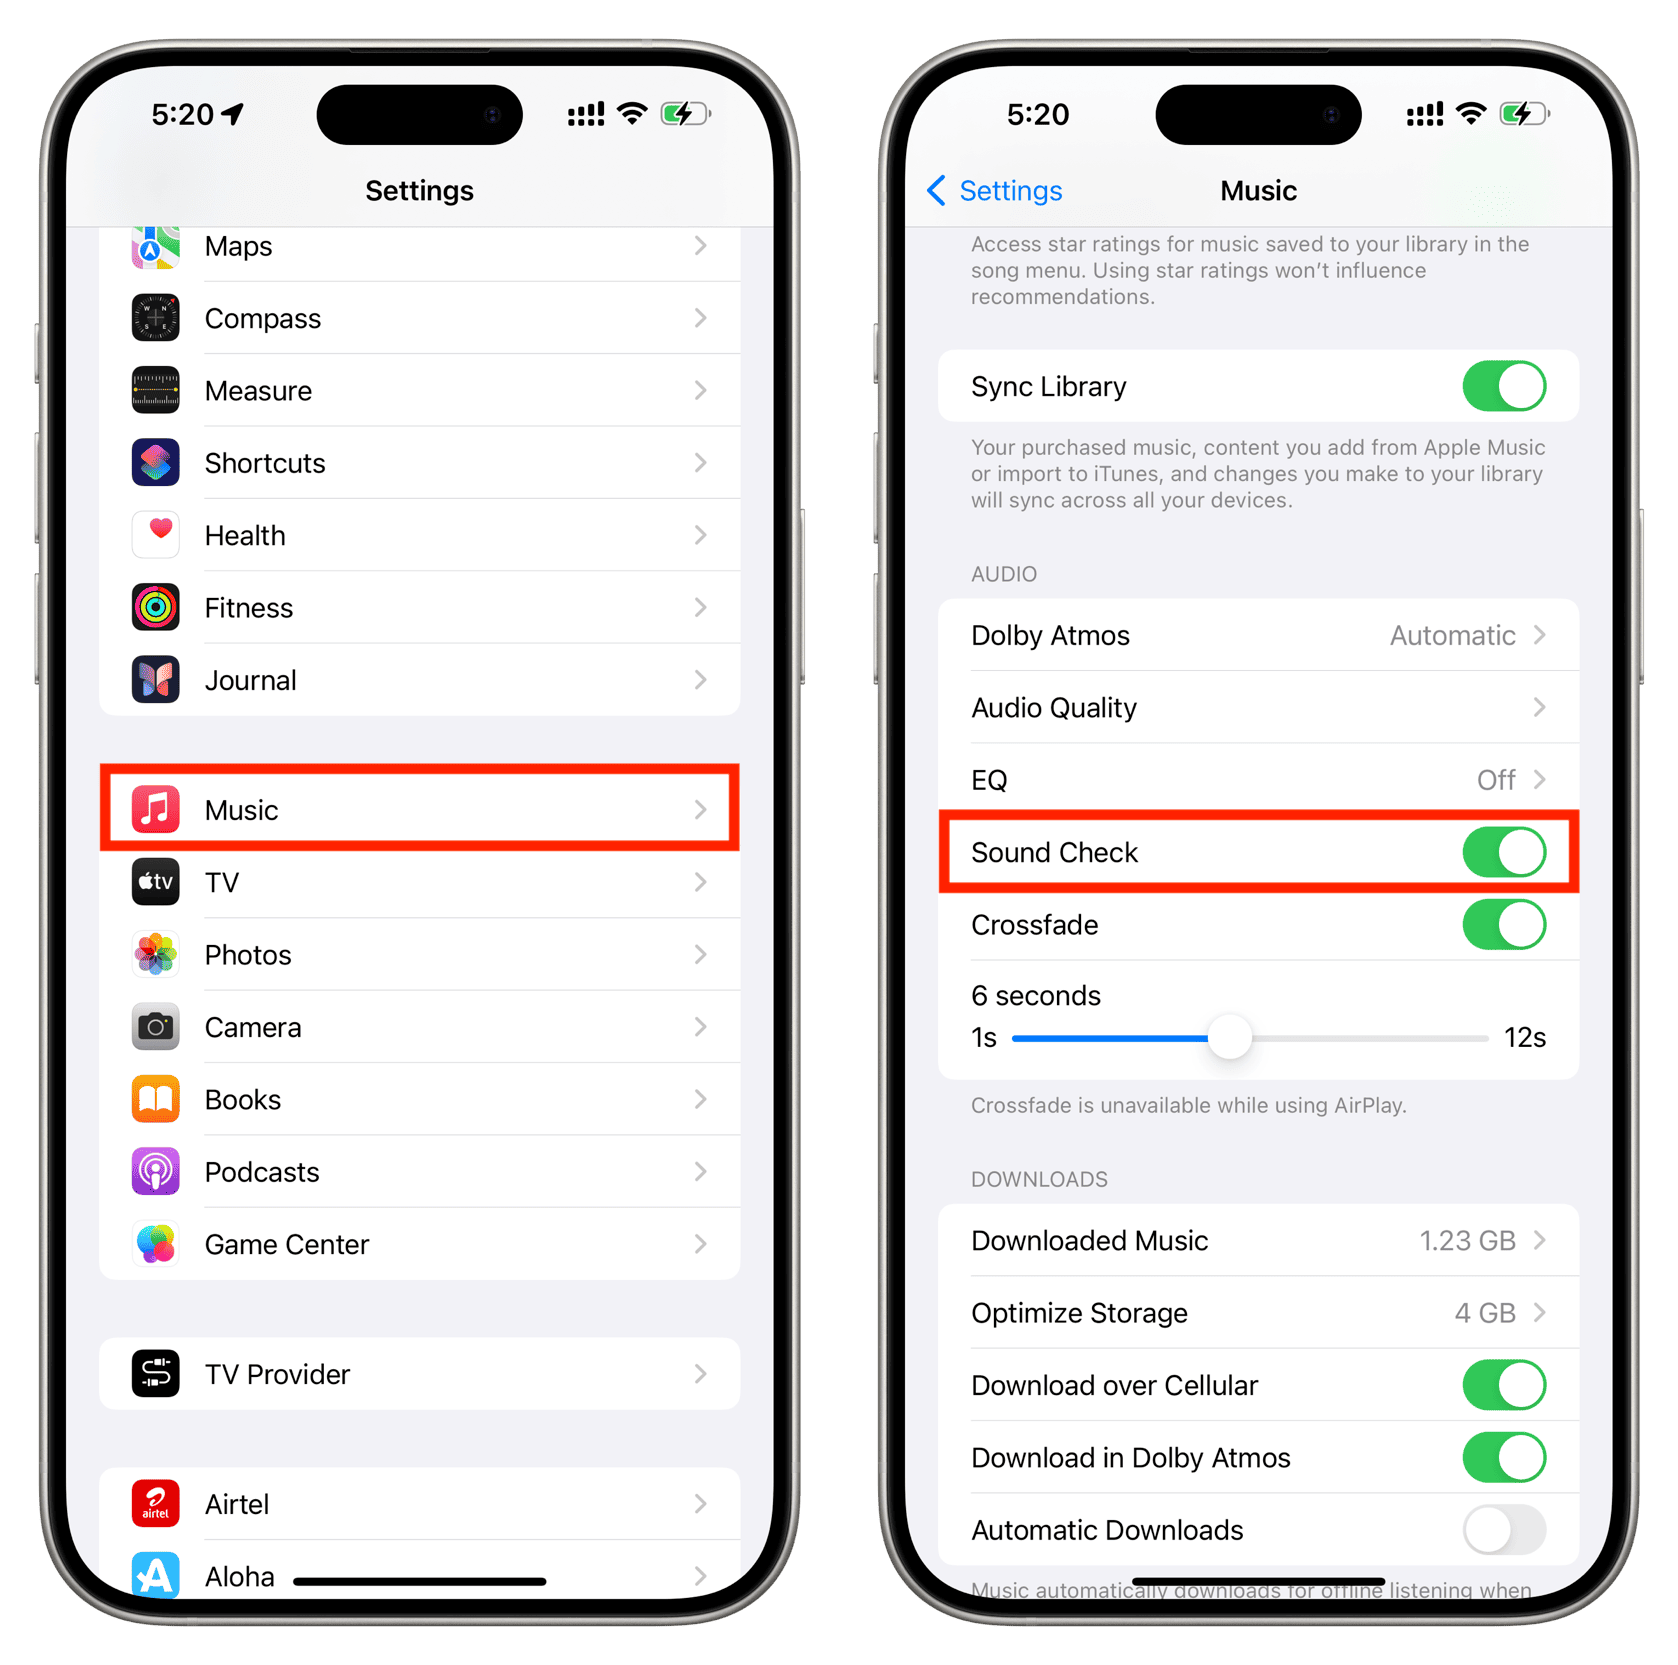 Sound Check in iPhone Music settings